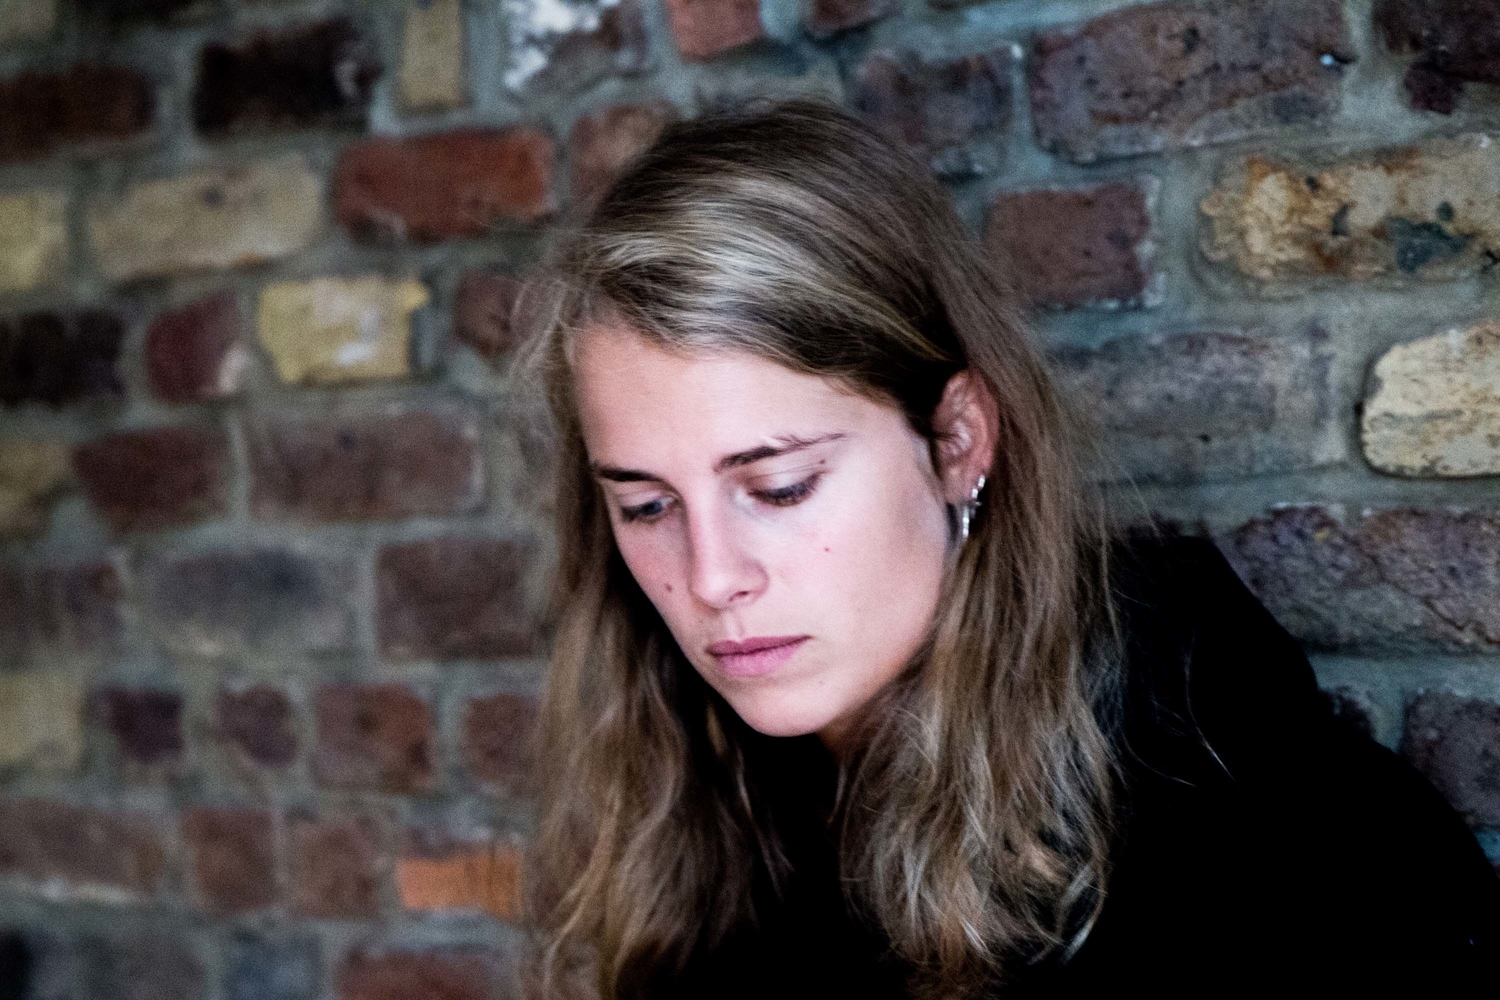 Marika Hackman returns with ‘i’m not where you are’